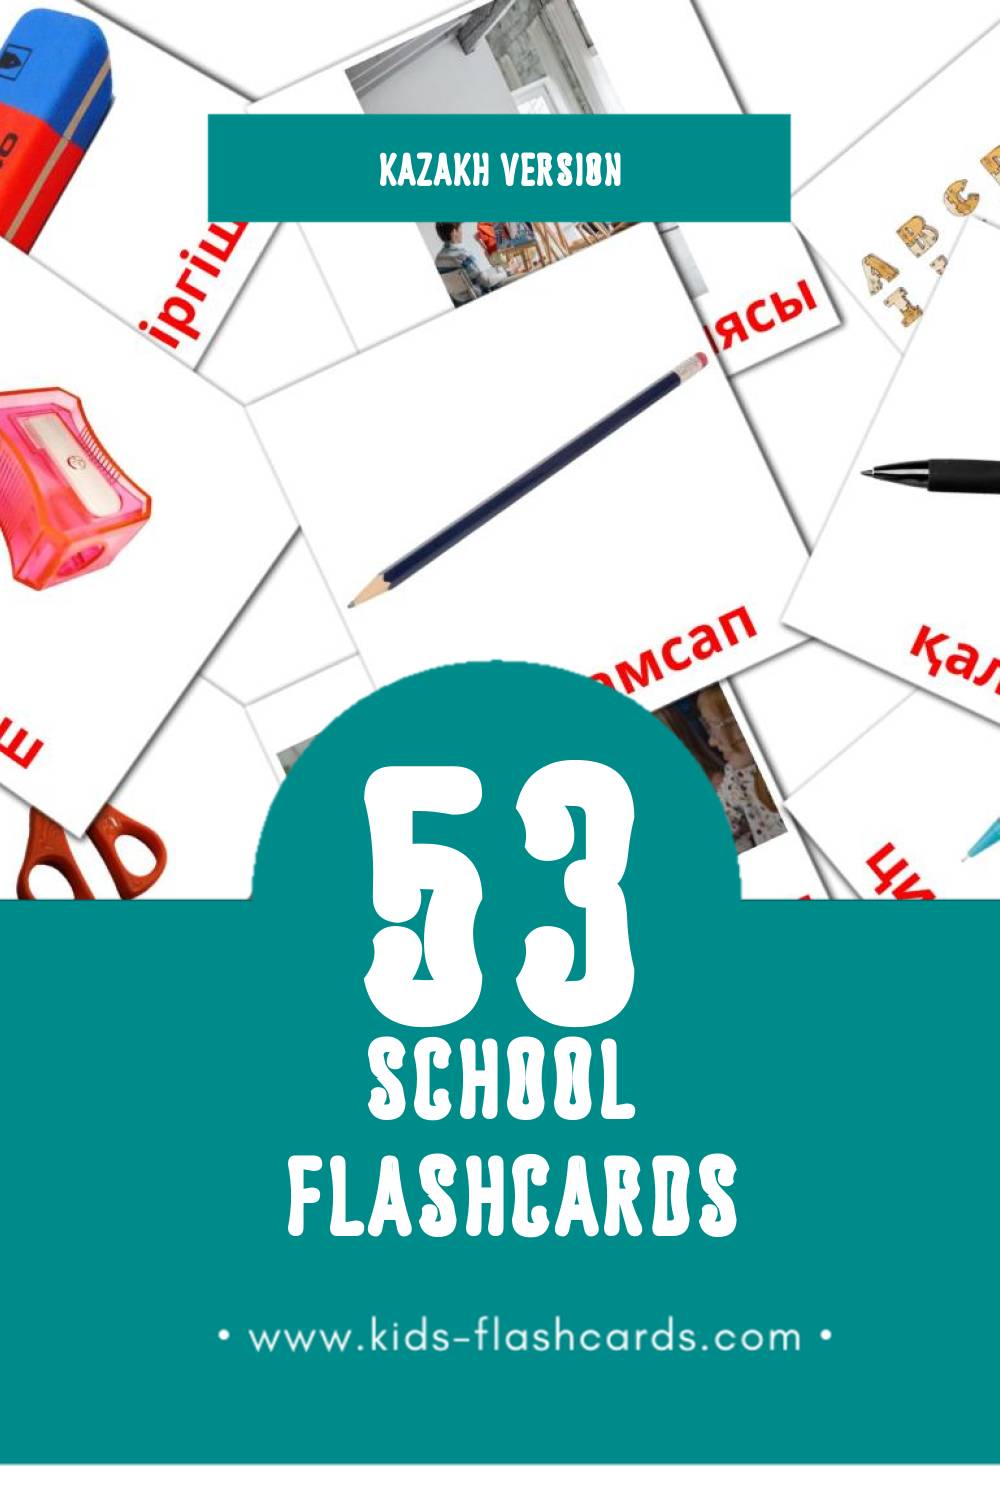 Visual Мектеп Flashcards for Toddlers (53 cards in Kazakh)